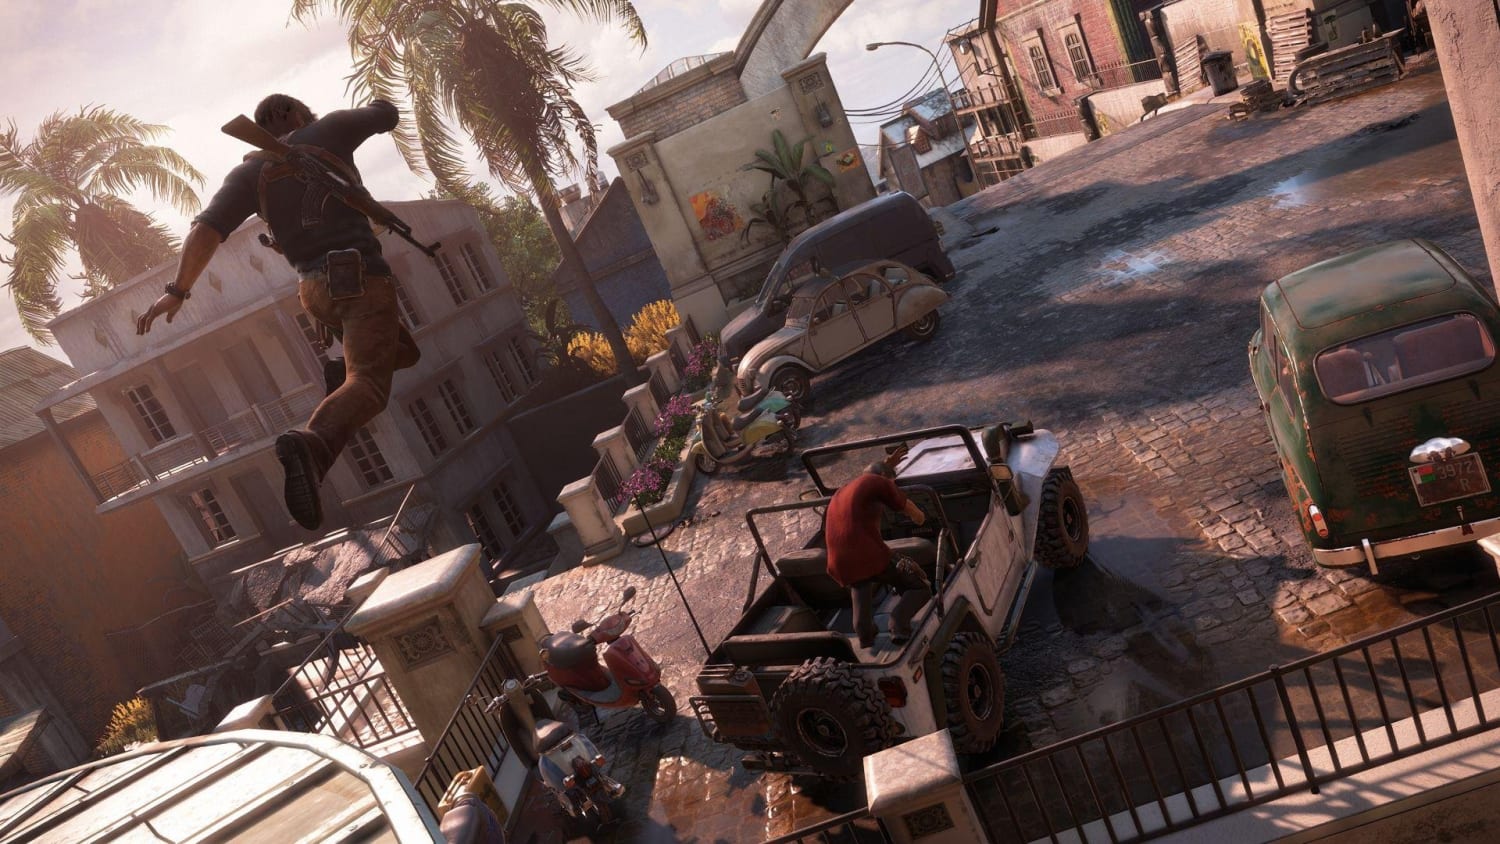 Uncharted 3's Talbot Boss is an Essential Video Game Boss Fight